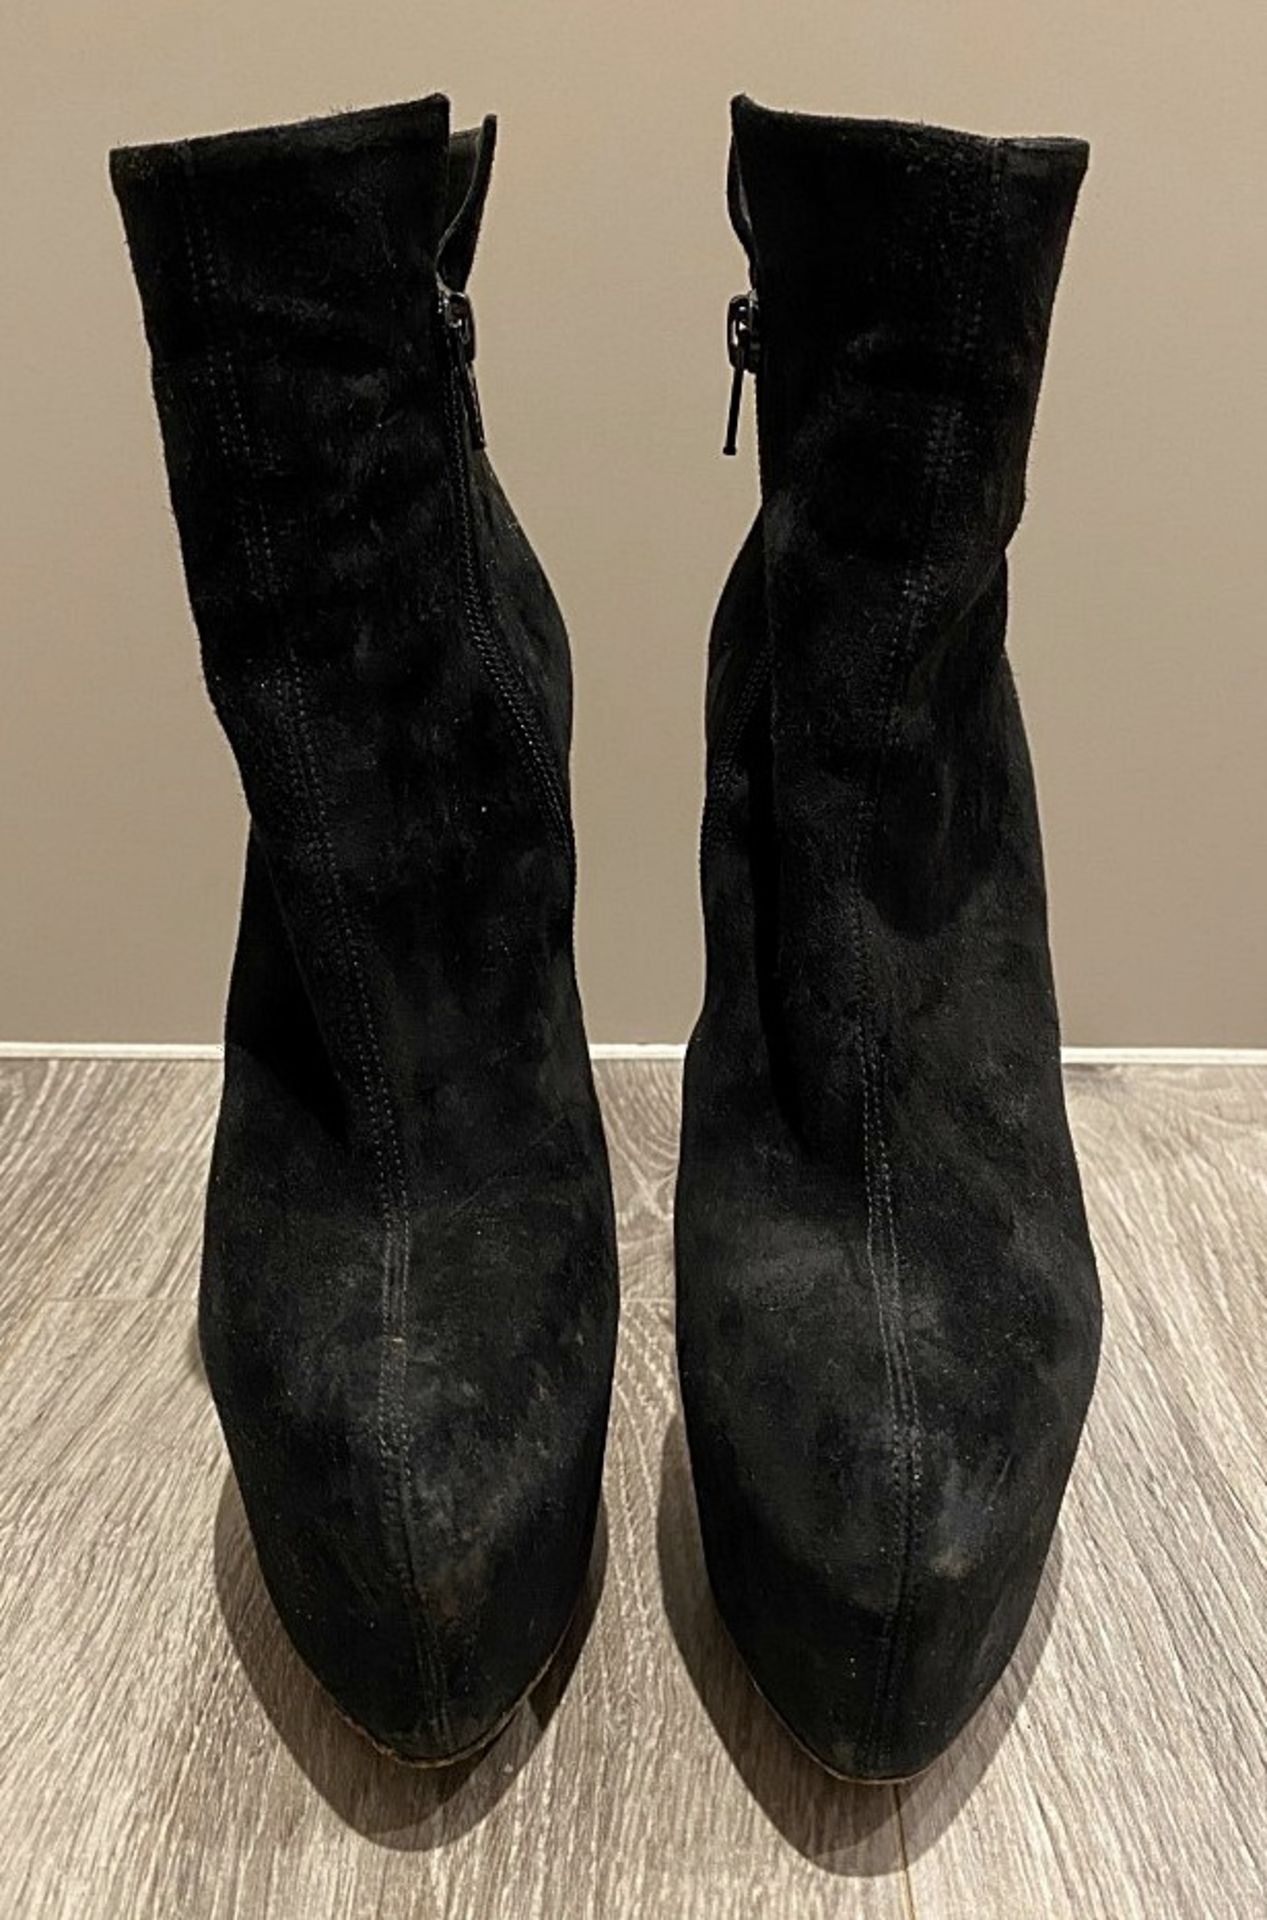 1 x Pair Of Genuine Christain Louboutin Boots In Black - Size: 36.5 - Preowned in Good Condition - R - Image 2 of 4